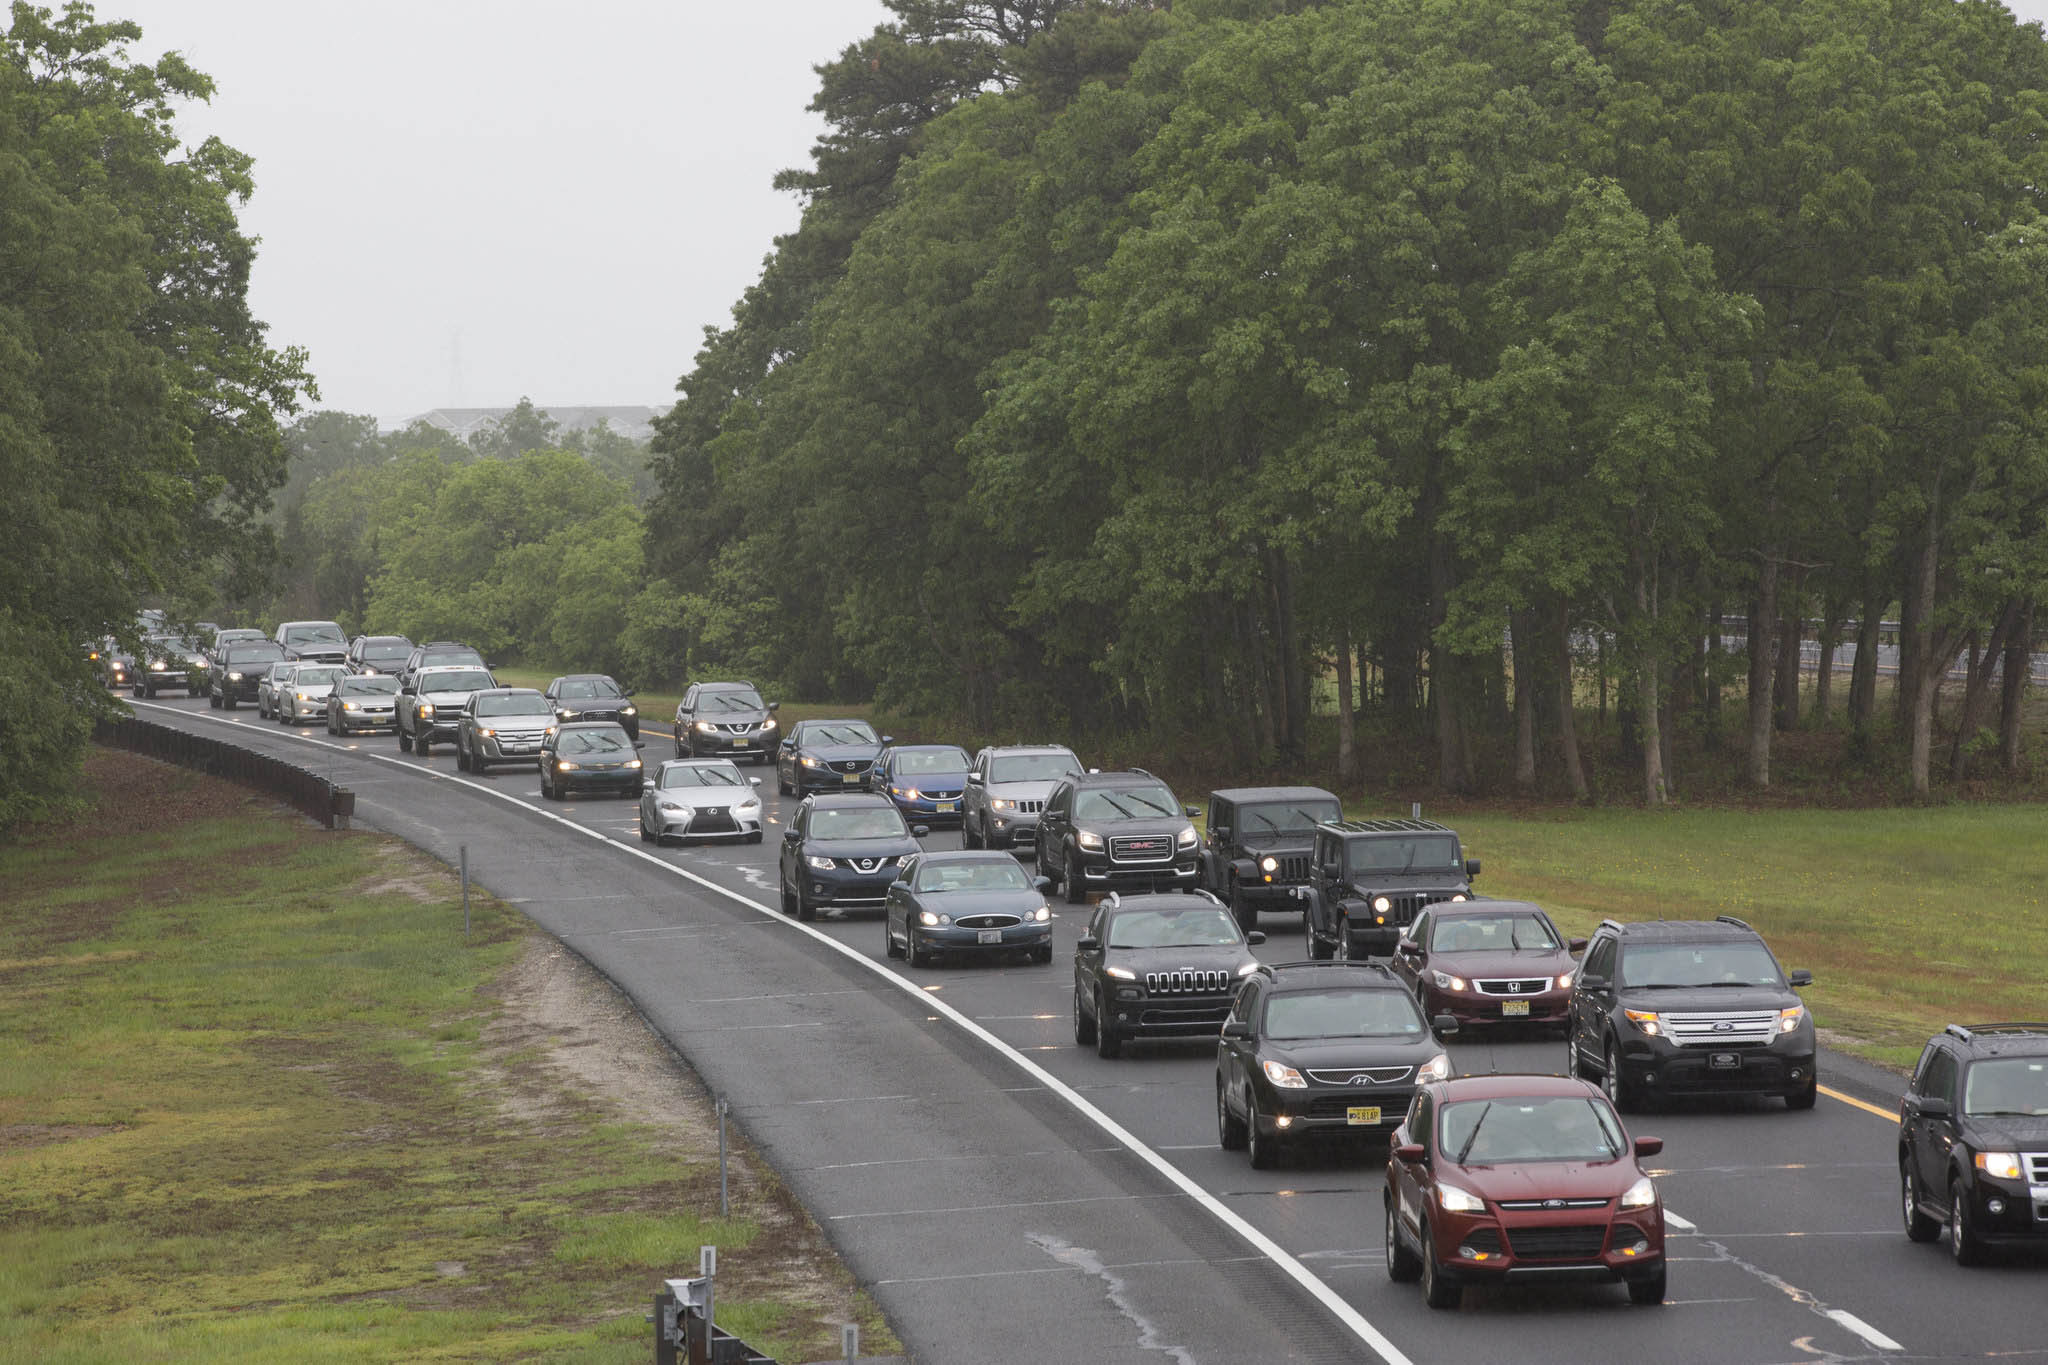 Tolls On Nj Turnpike Garden State Parkway And Ac Expressway Are Going Up This Weekend